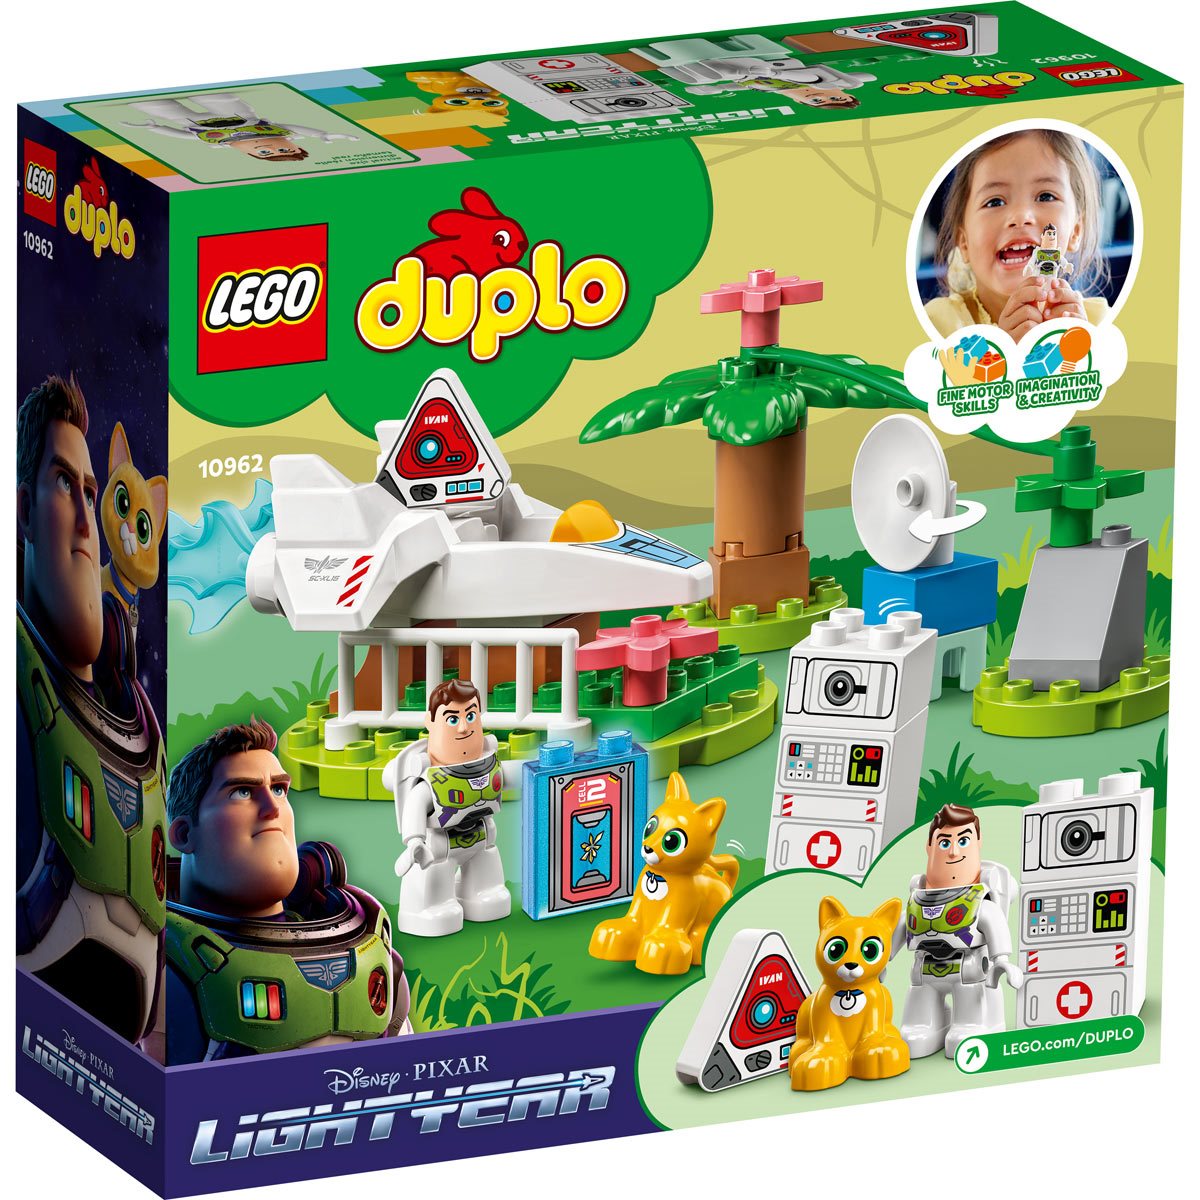 LEGO DUPLO Disney and Pixar Buzz Lightyear's Planetary Mission 10962, Space  Toys for Toddlers, Boys & Girls 2 Plus Years Old with Spaceship & Robot  Figure 